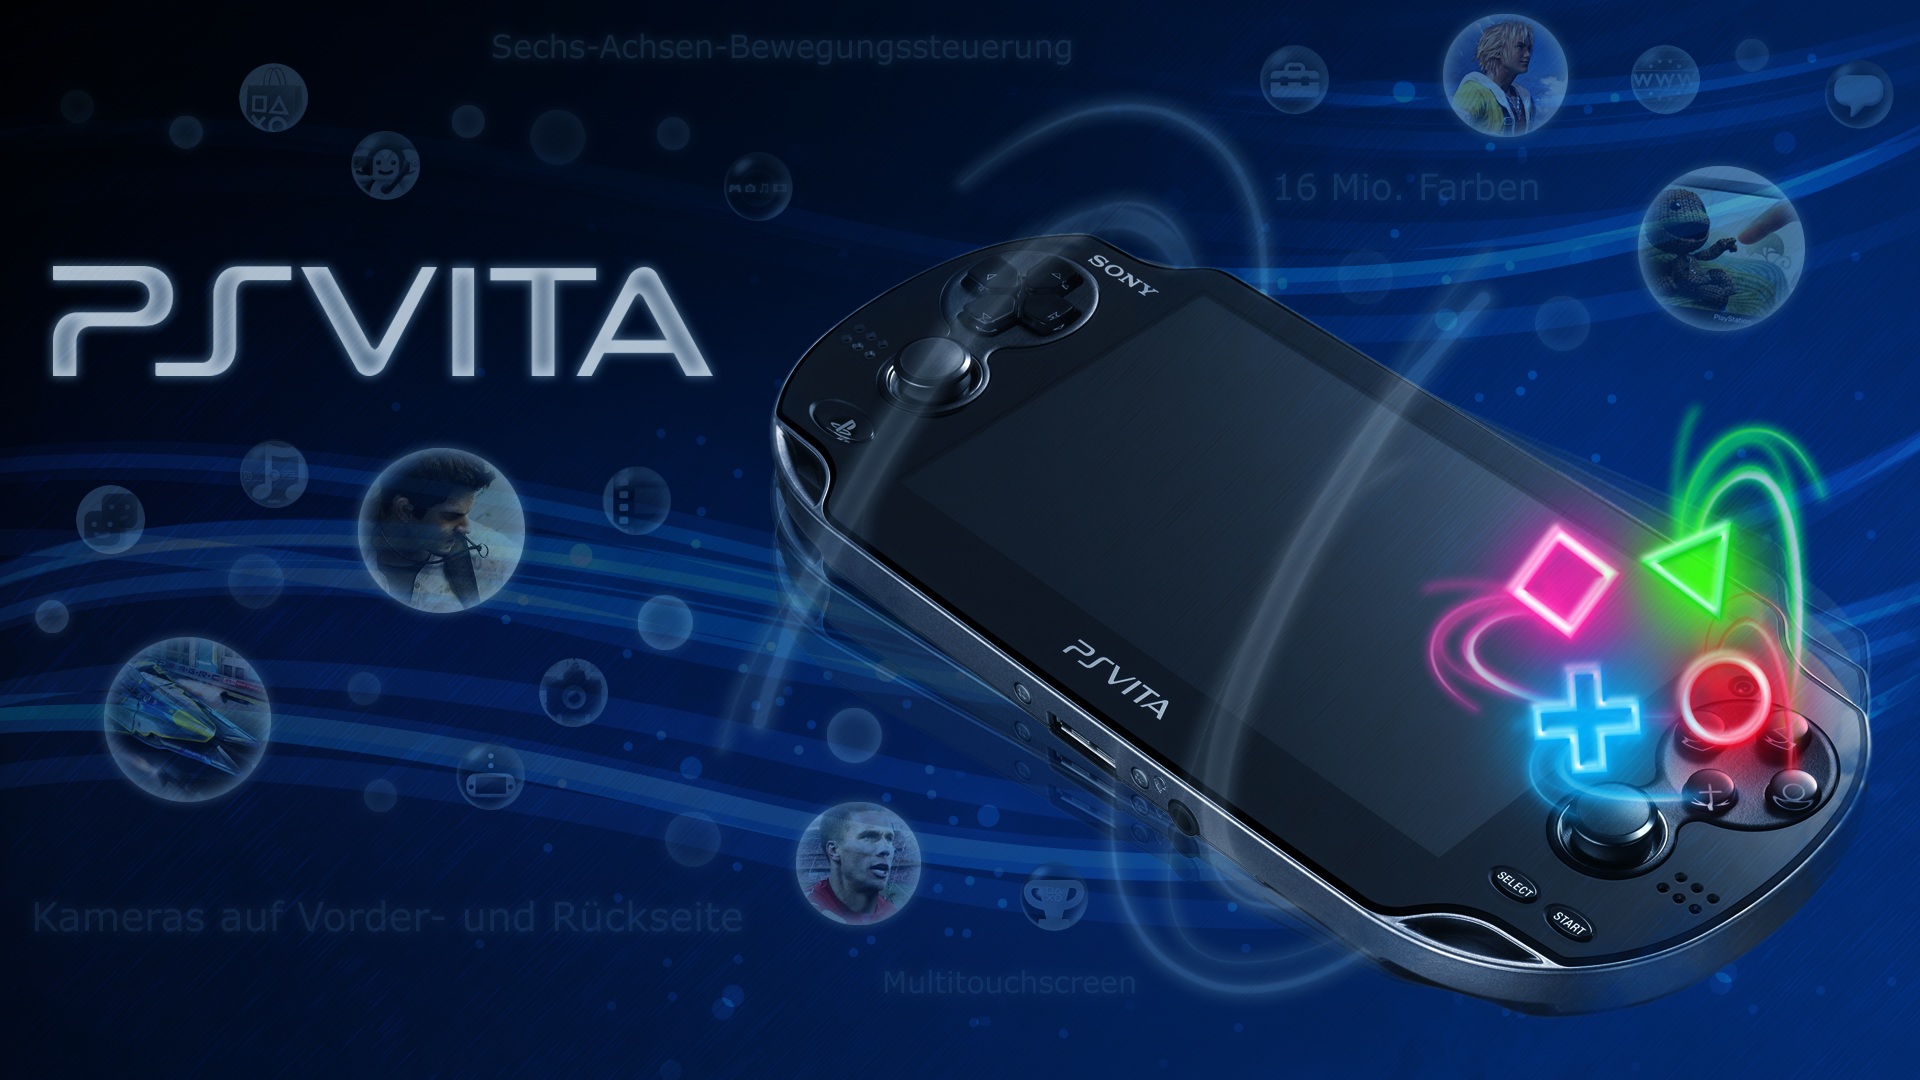 free download for ps vita emulator now